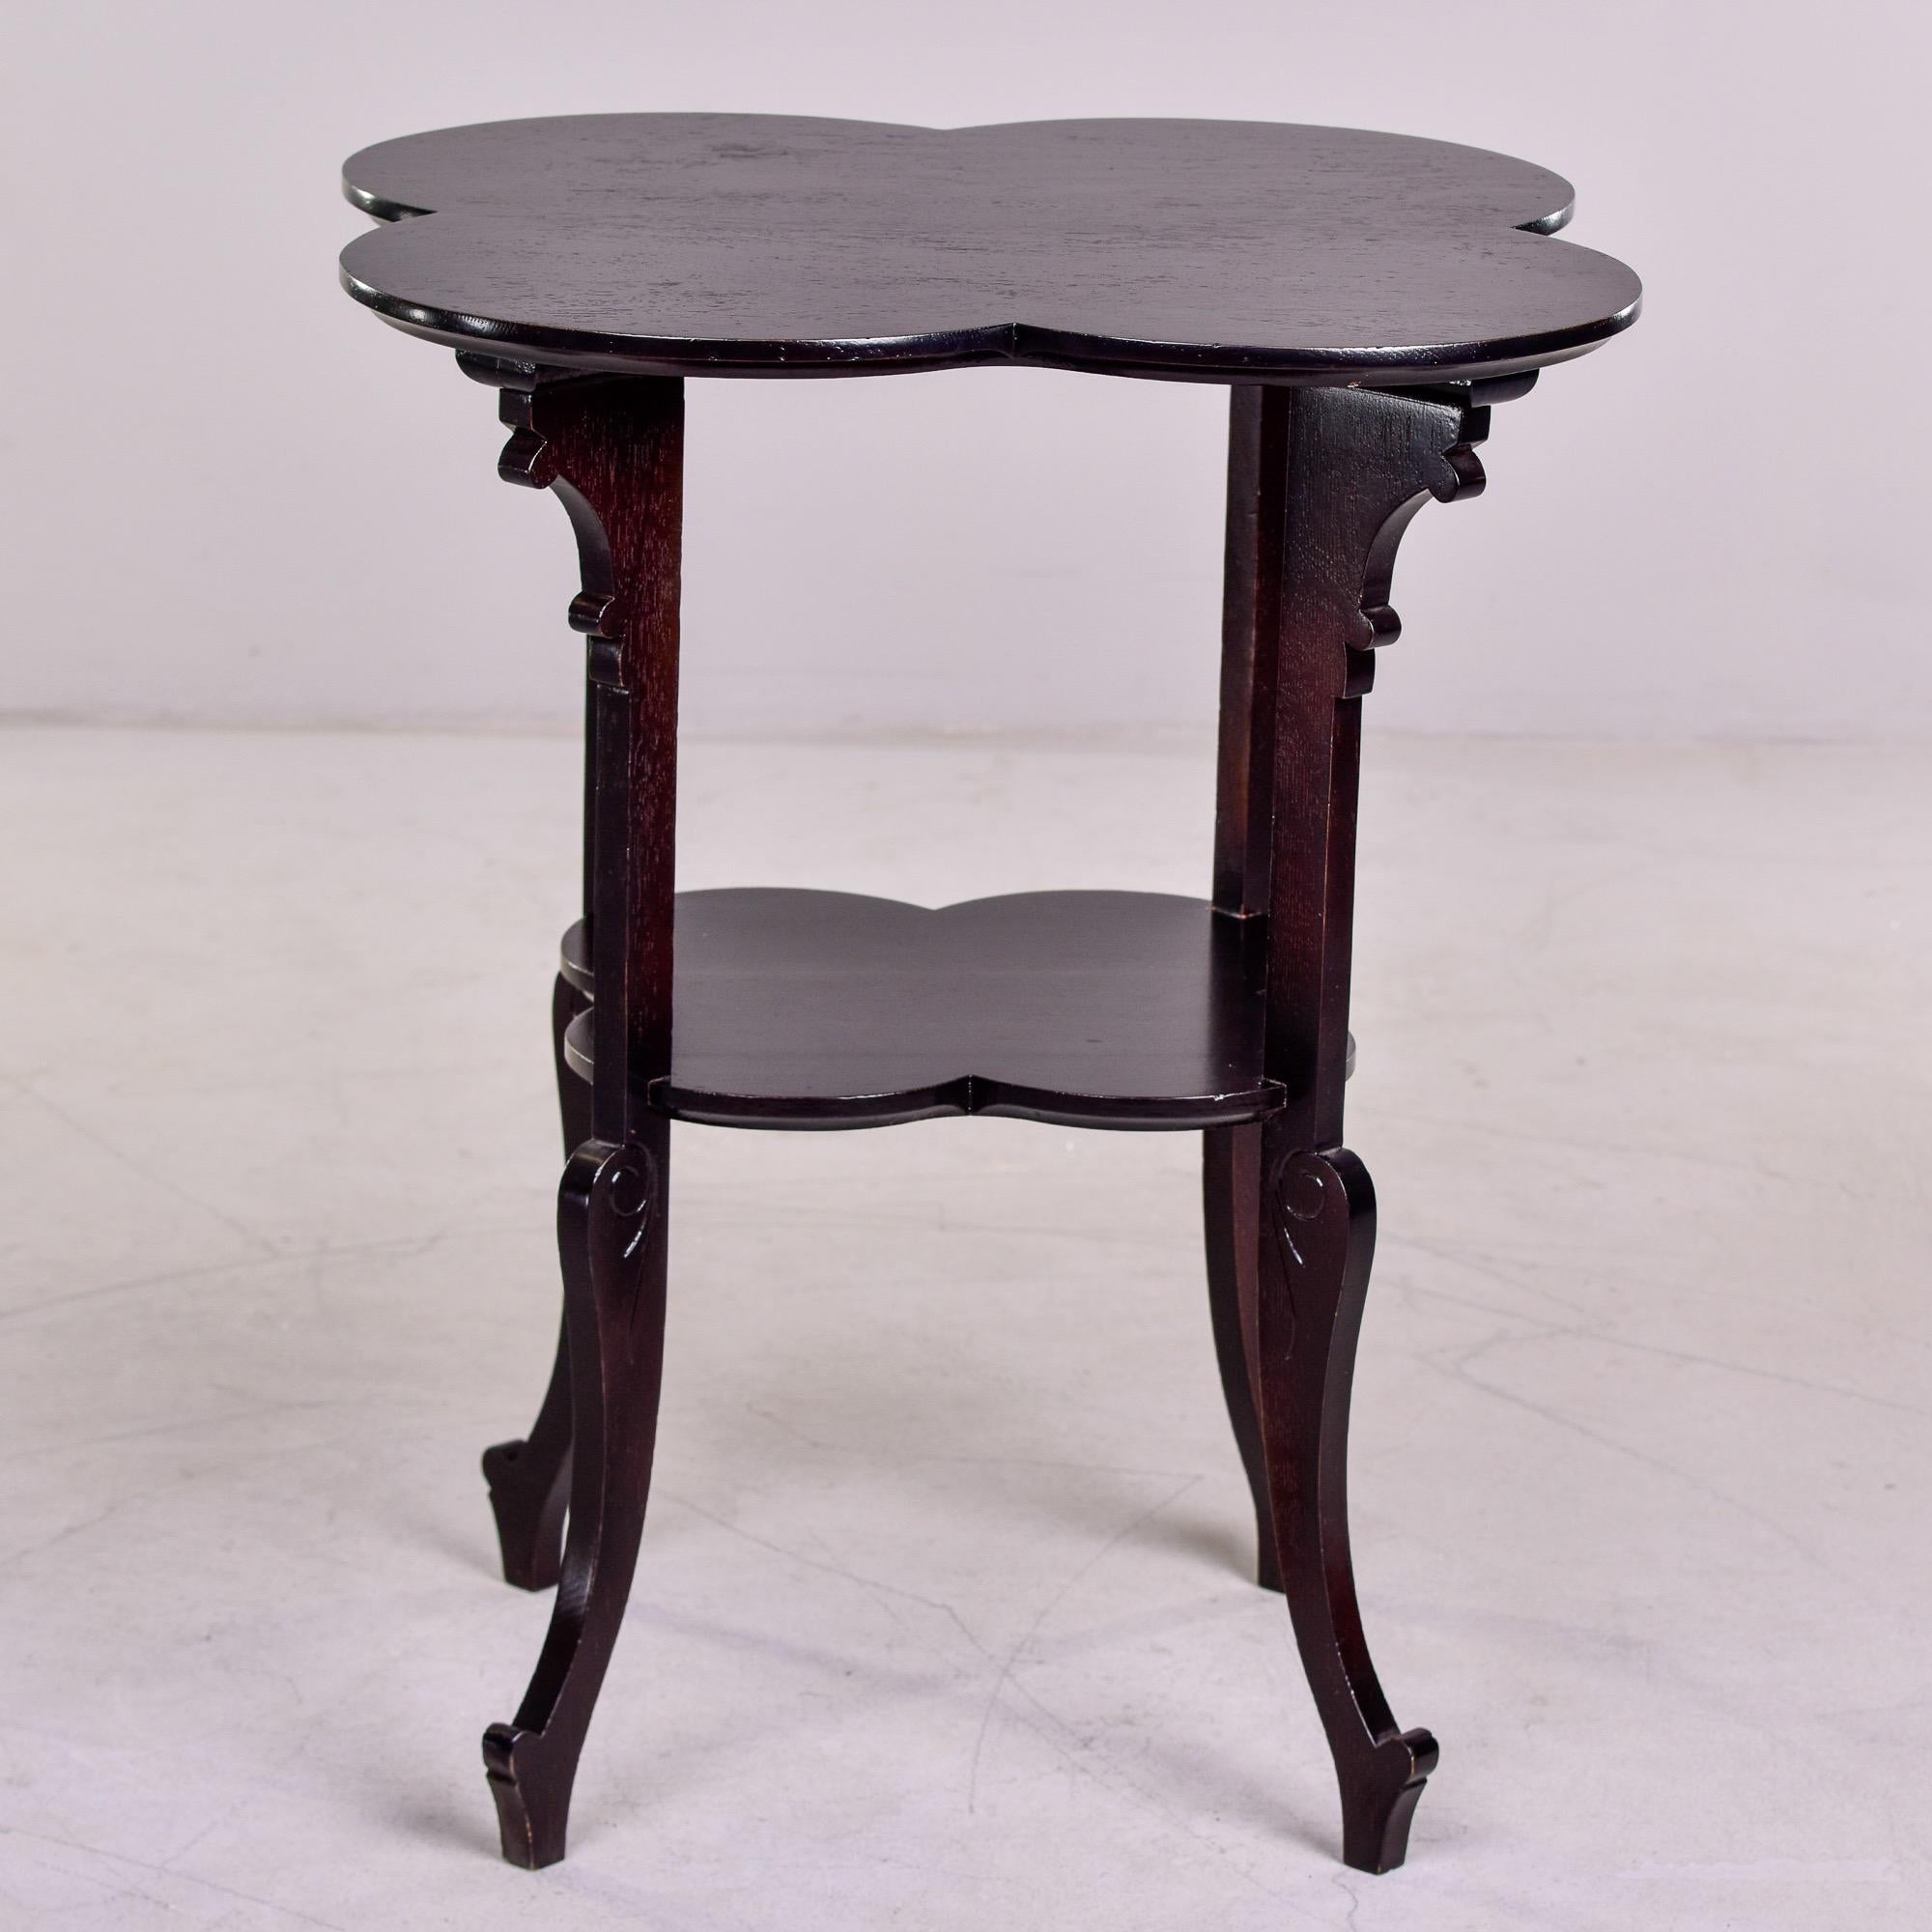 20th Century French Art Deco Black Scalloped Quatrefoil Side Table For Sale